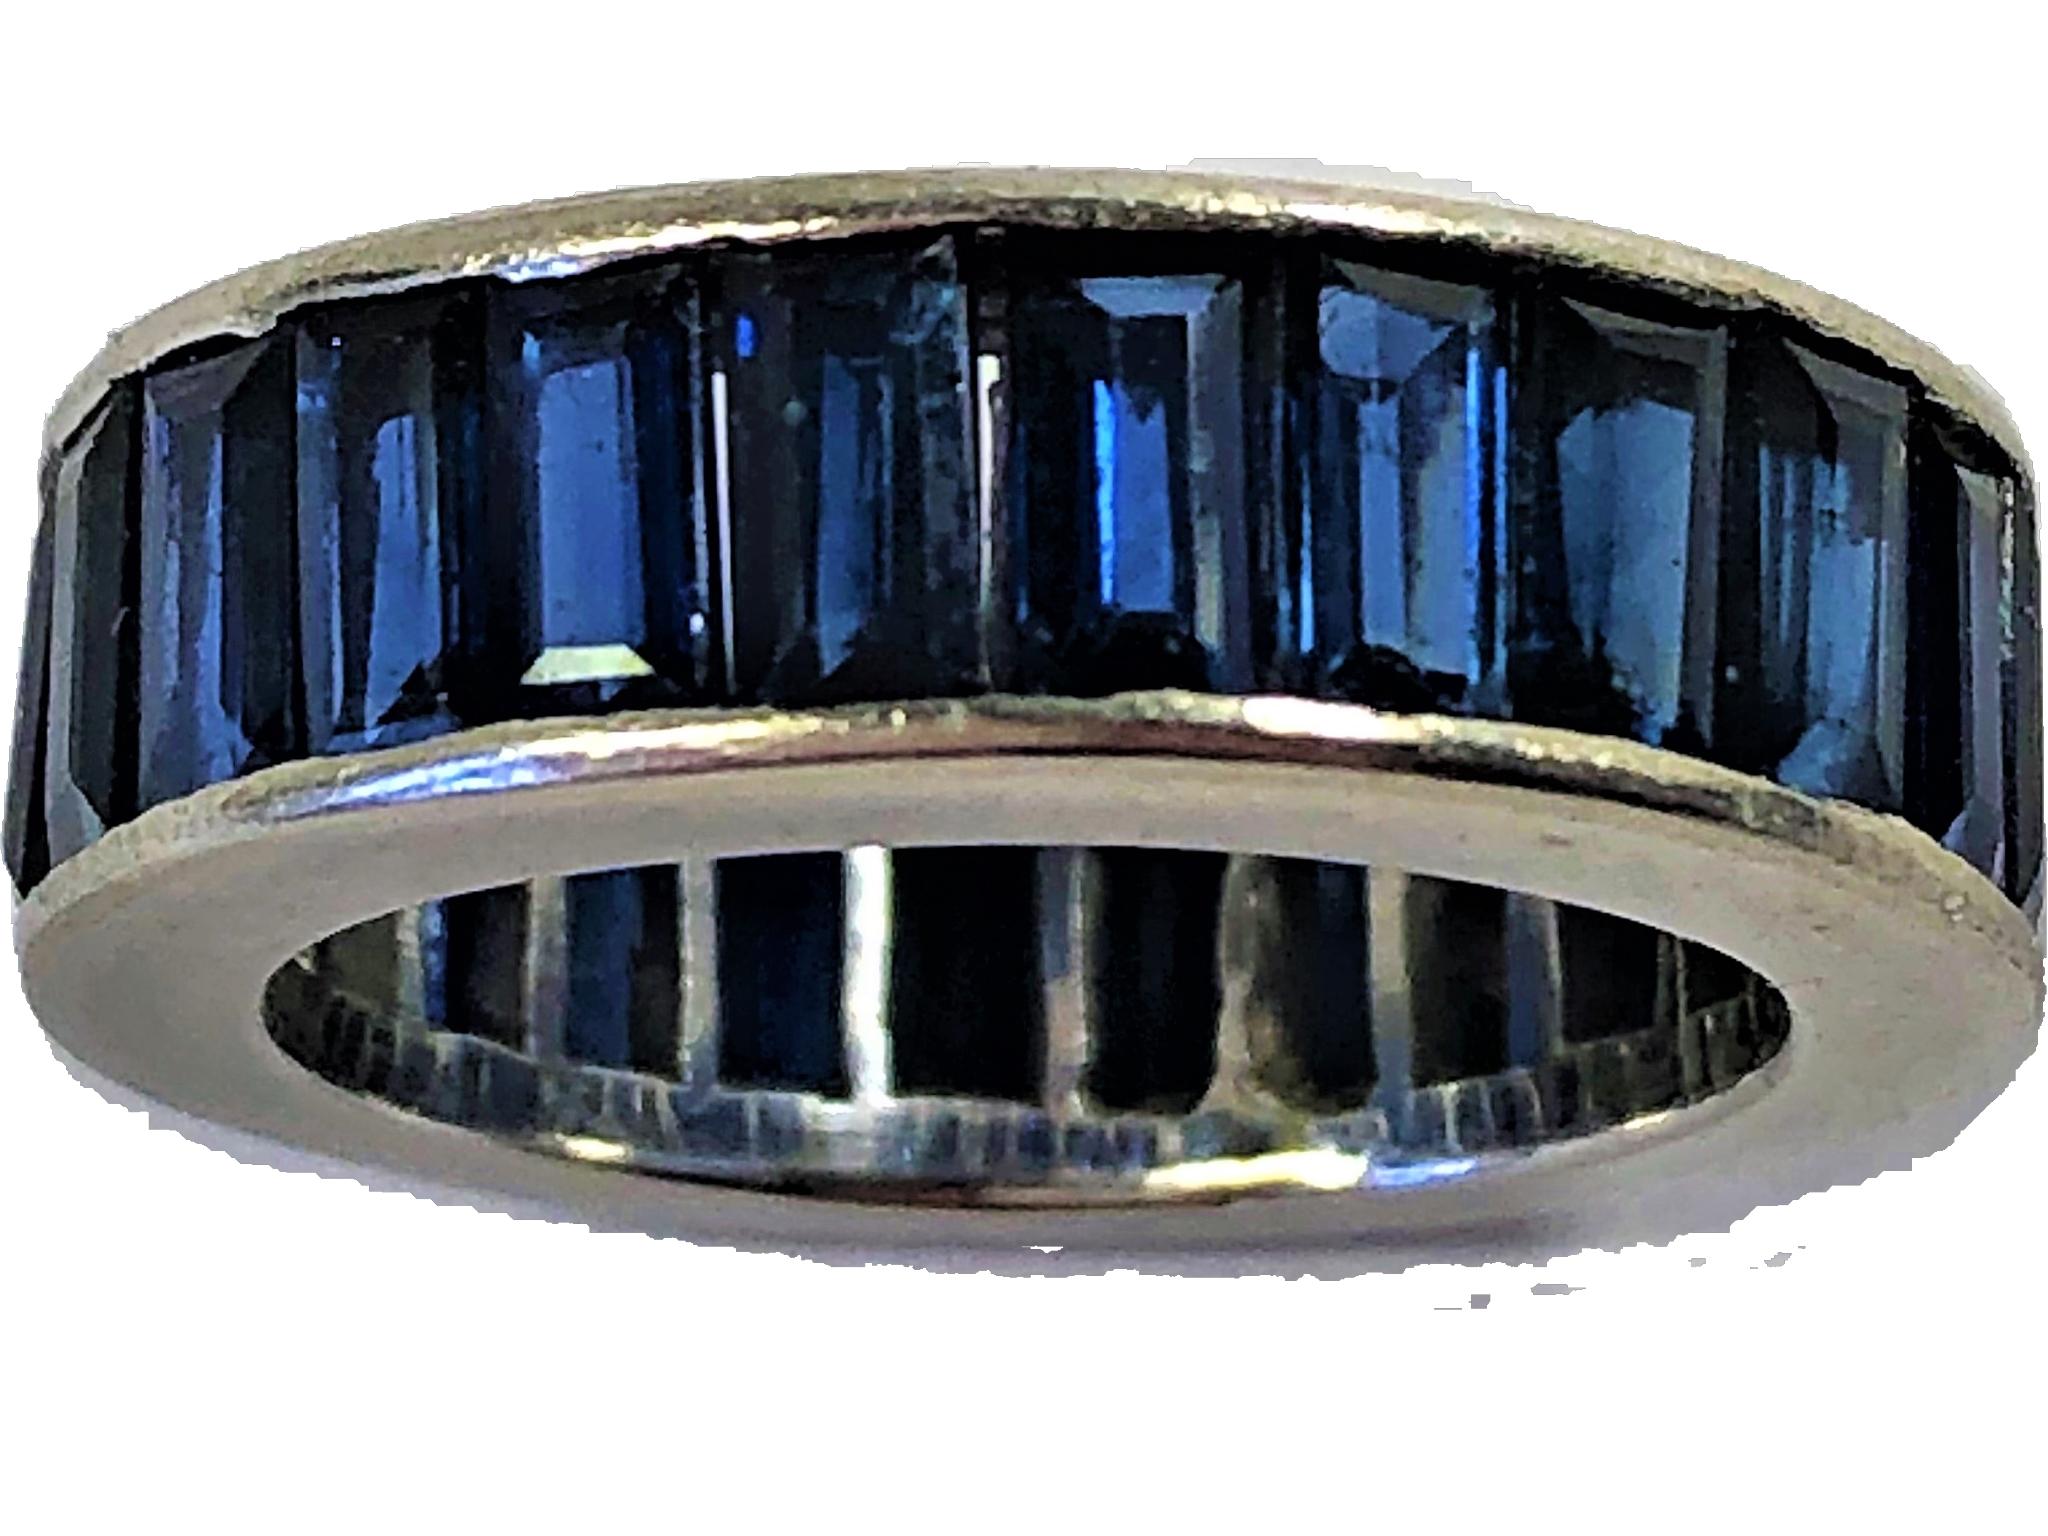 This vintage platinum eternity band is set with deep blue, baguette cut natural sapphires weighing an approximate total of 5CT.  Measures 6mm wide (just short of 1/4 inch). Ring size 4 3/4.  Gross weight 7.1grams. Shown with a vintage platinum